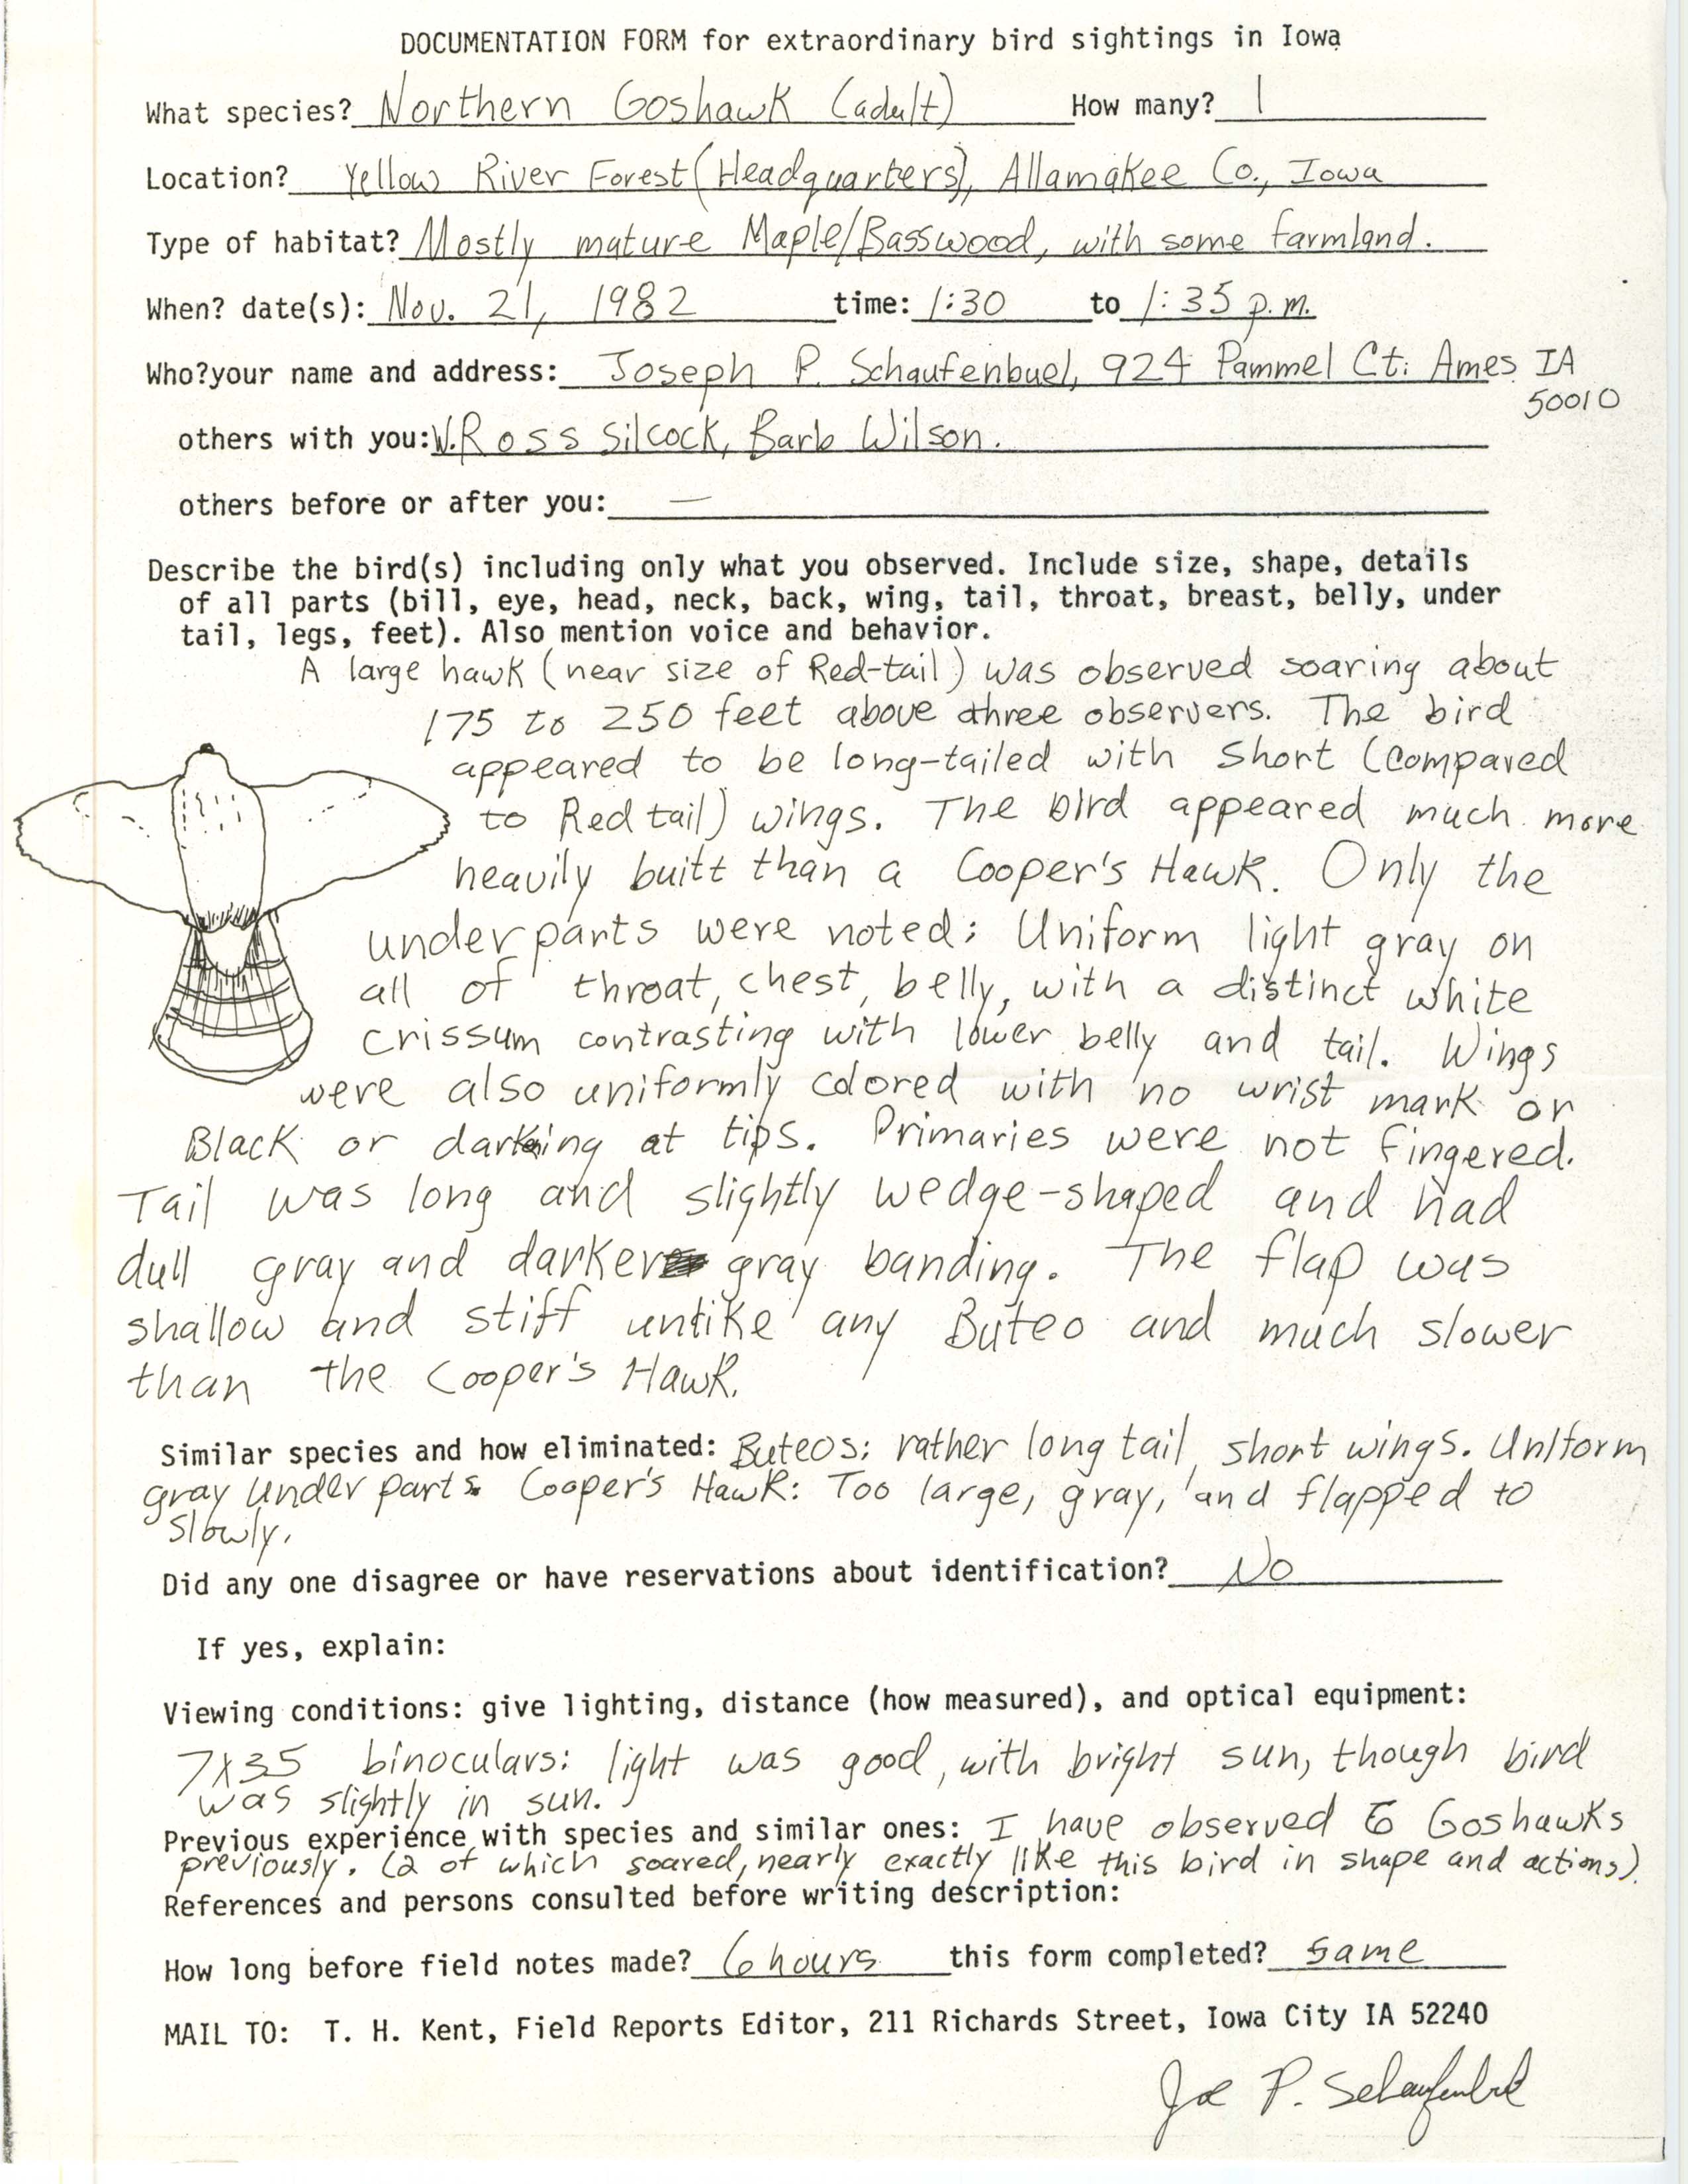 Rare bird documentation form for Northern Goshawk at Yellow River Forest, 1982